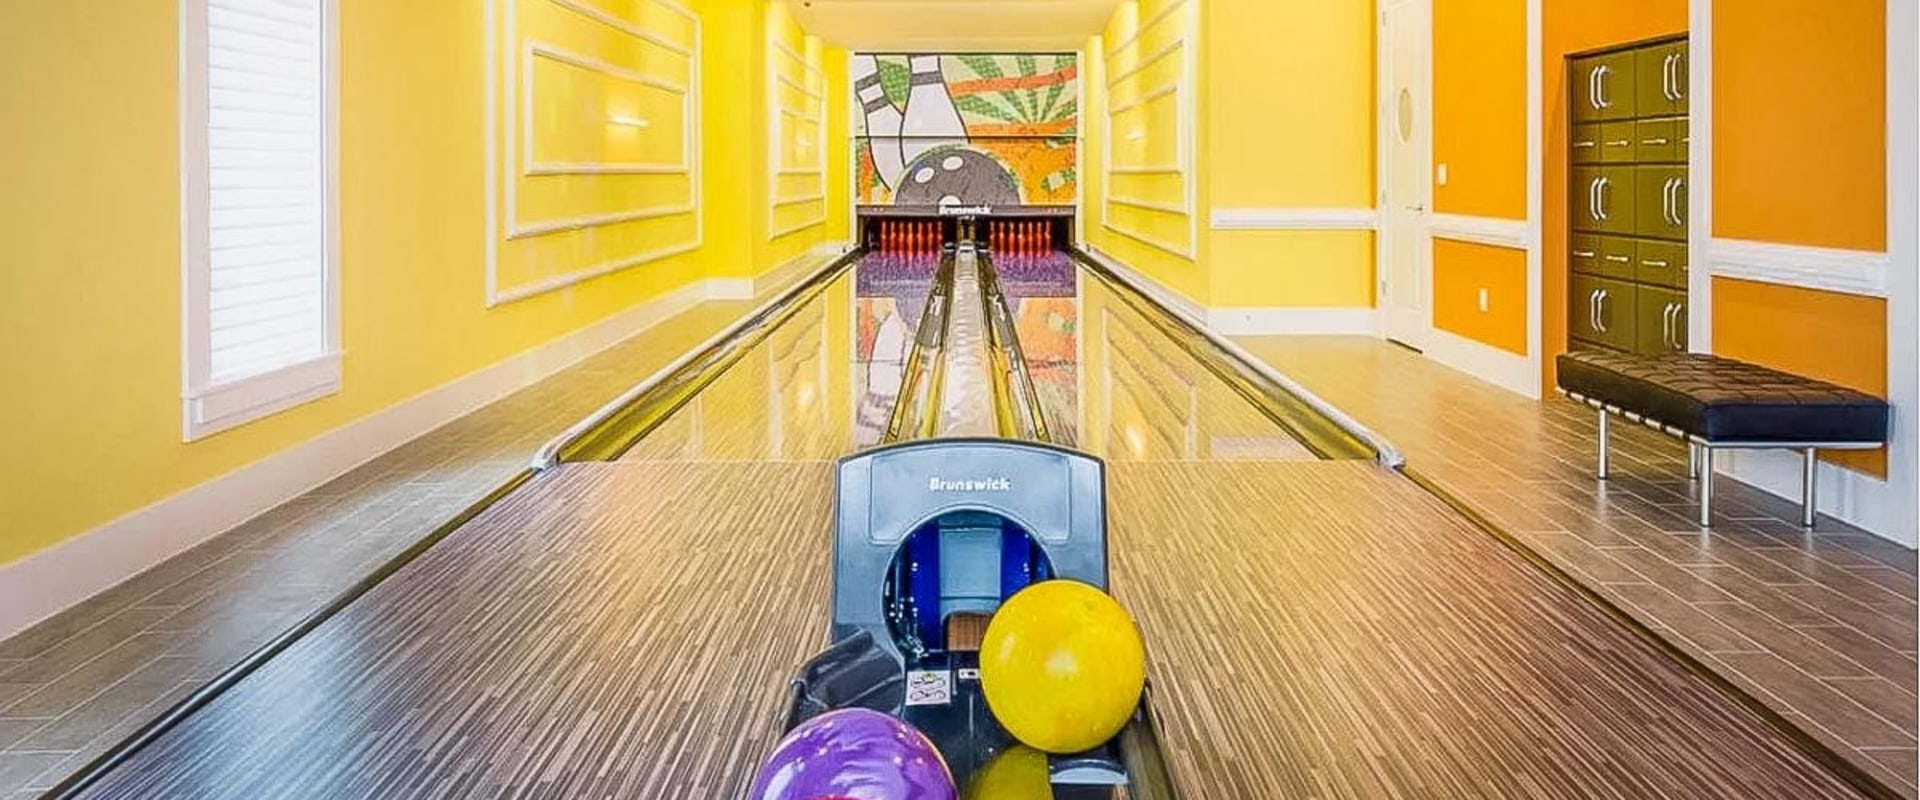 What Amenities Does Each Bowling Lane Rental Package Offer in Suffolk County, NY?